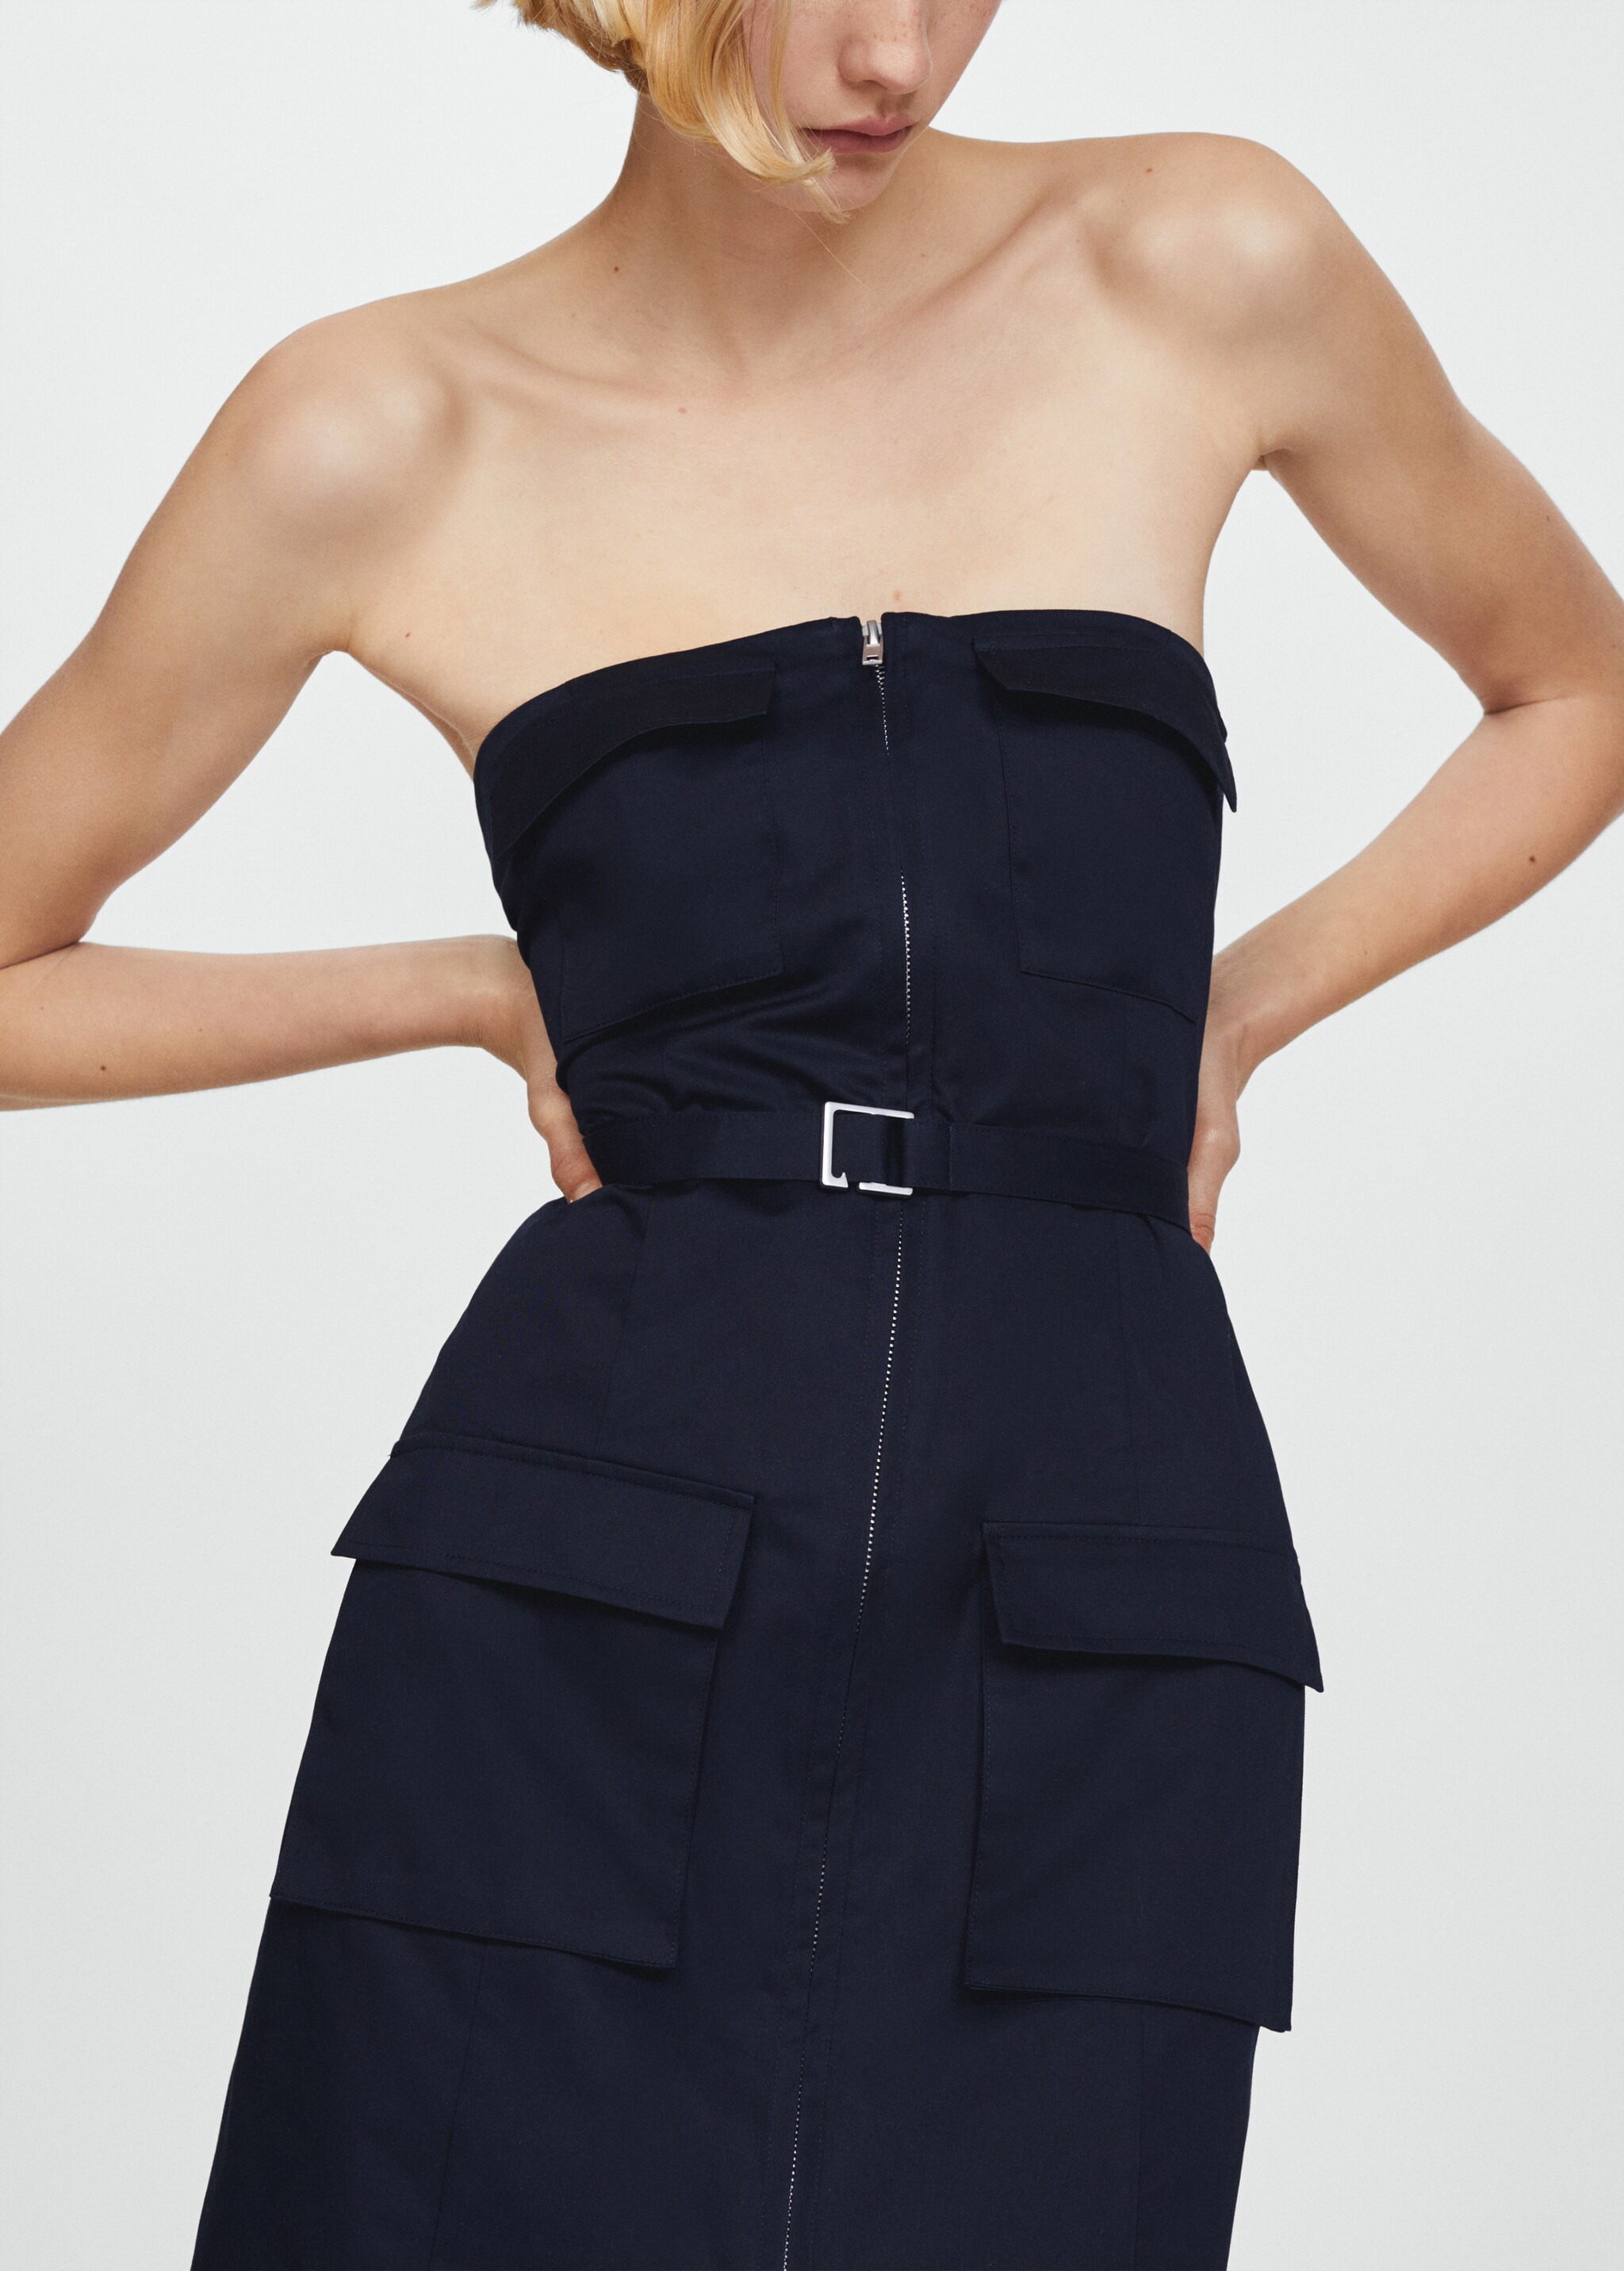 Belted strapless dress - Details of the article 6